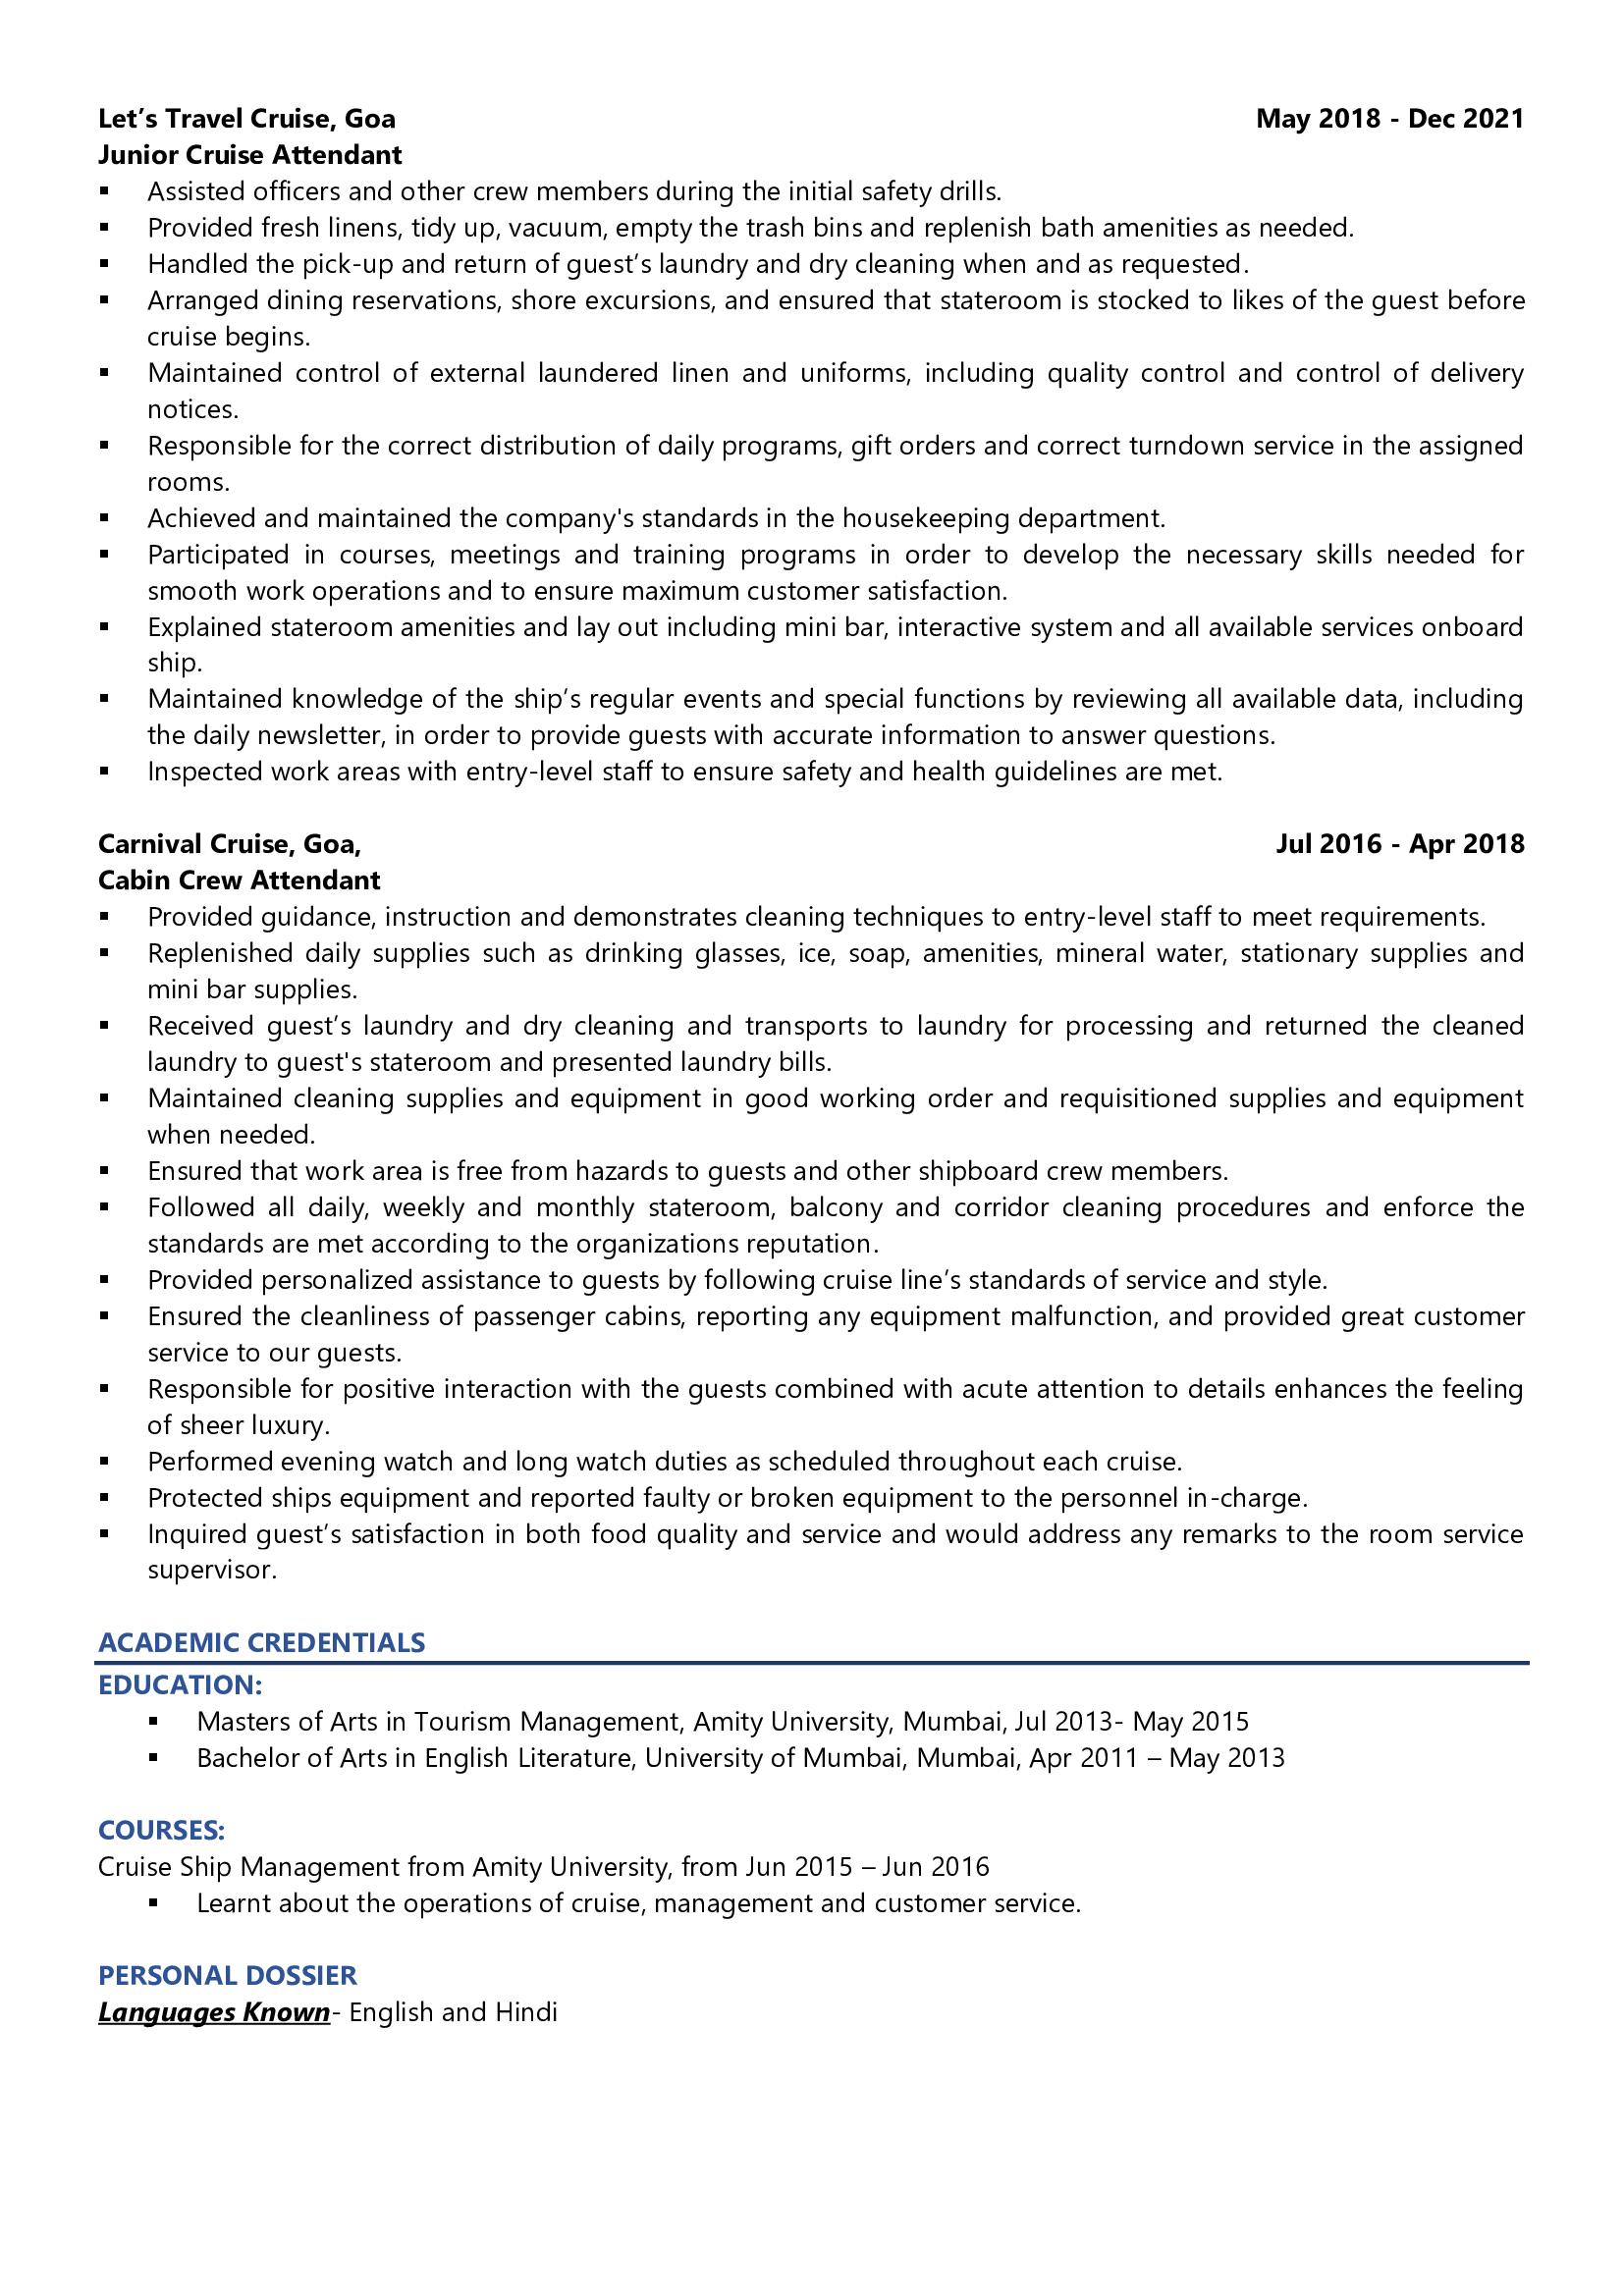 Cruise Ship Attendant - Resume Example & Template